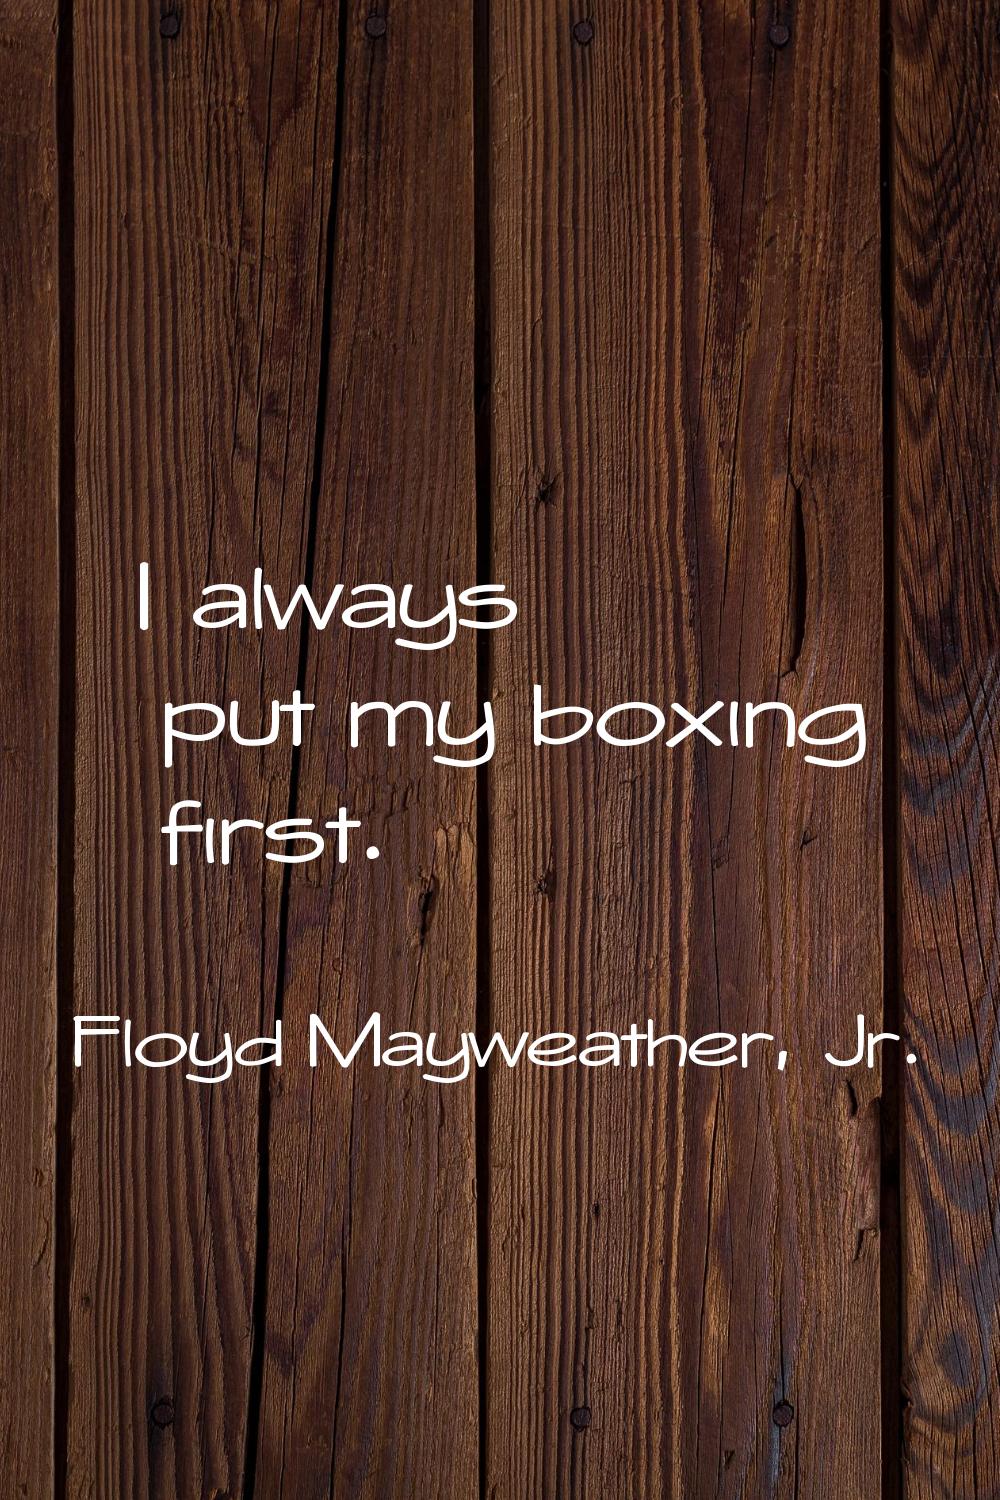 I always put my boxing first.